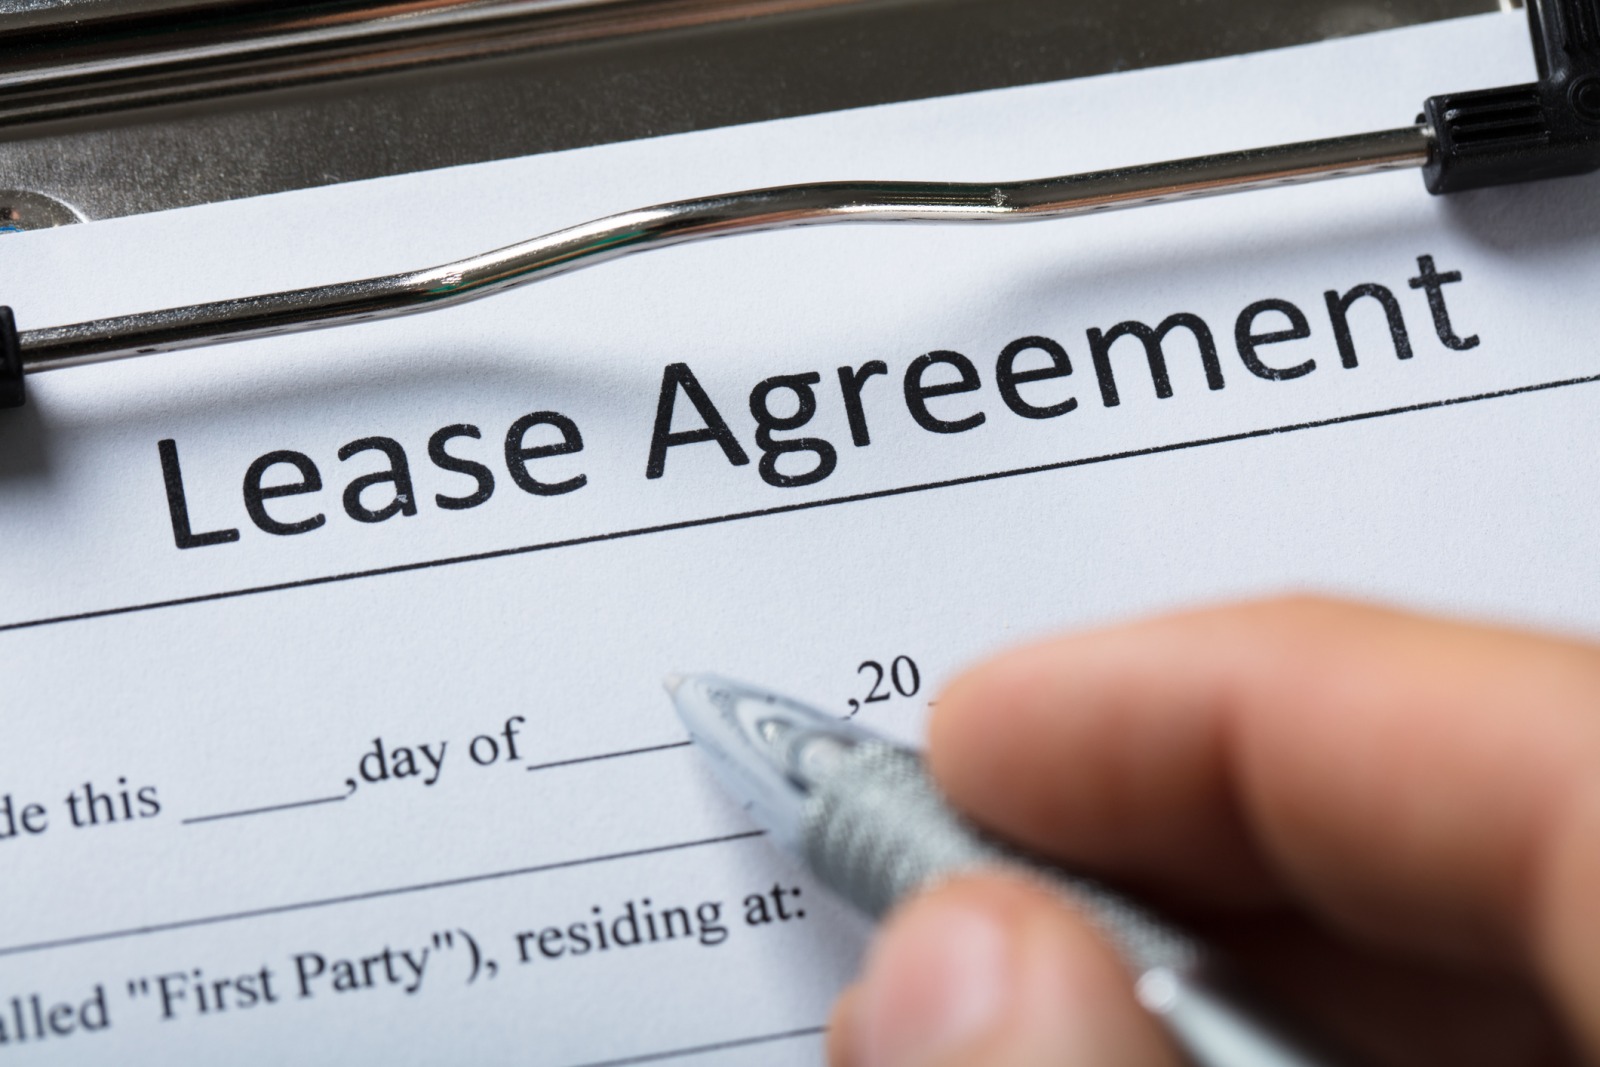 signing a lease